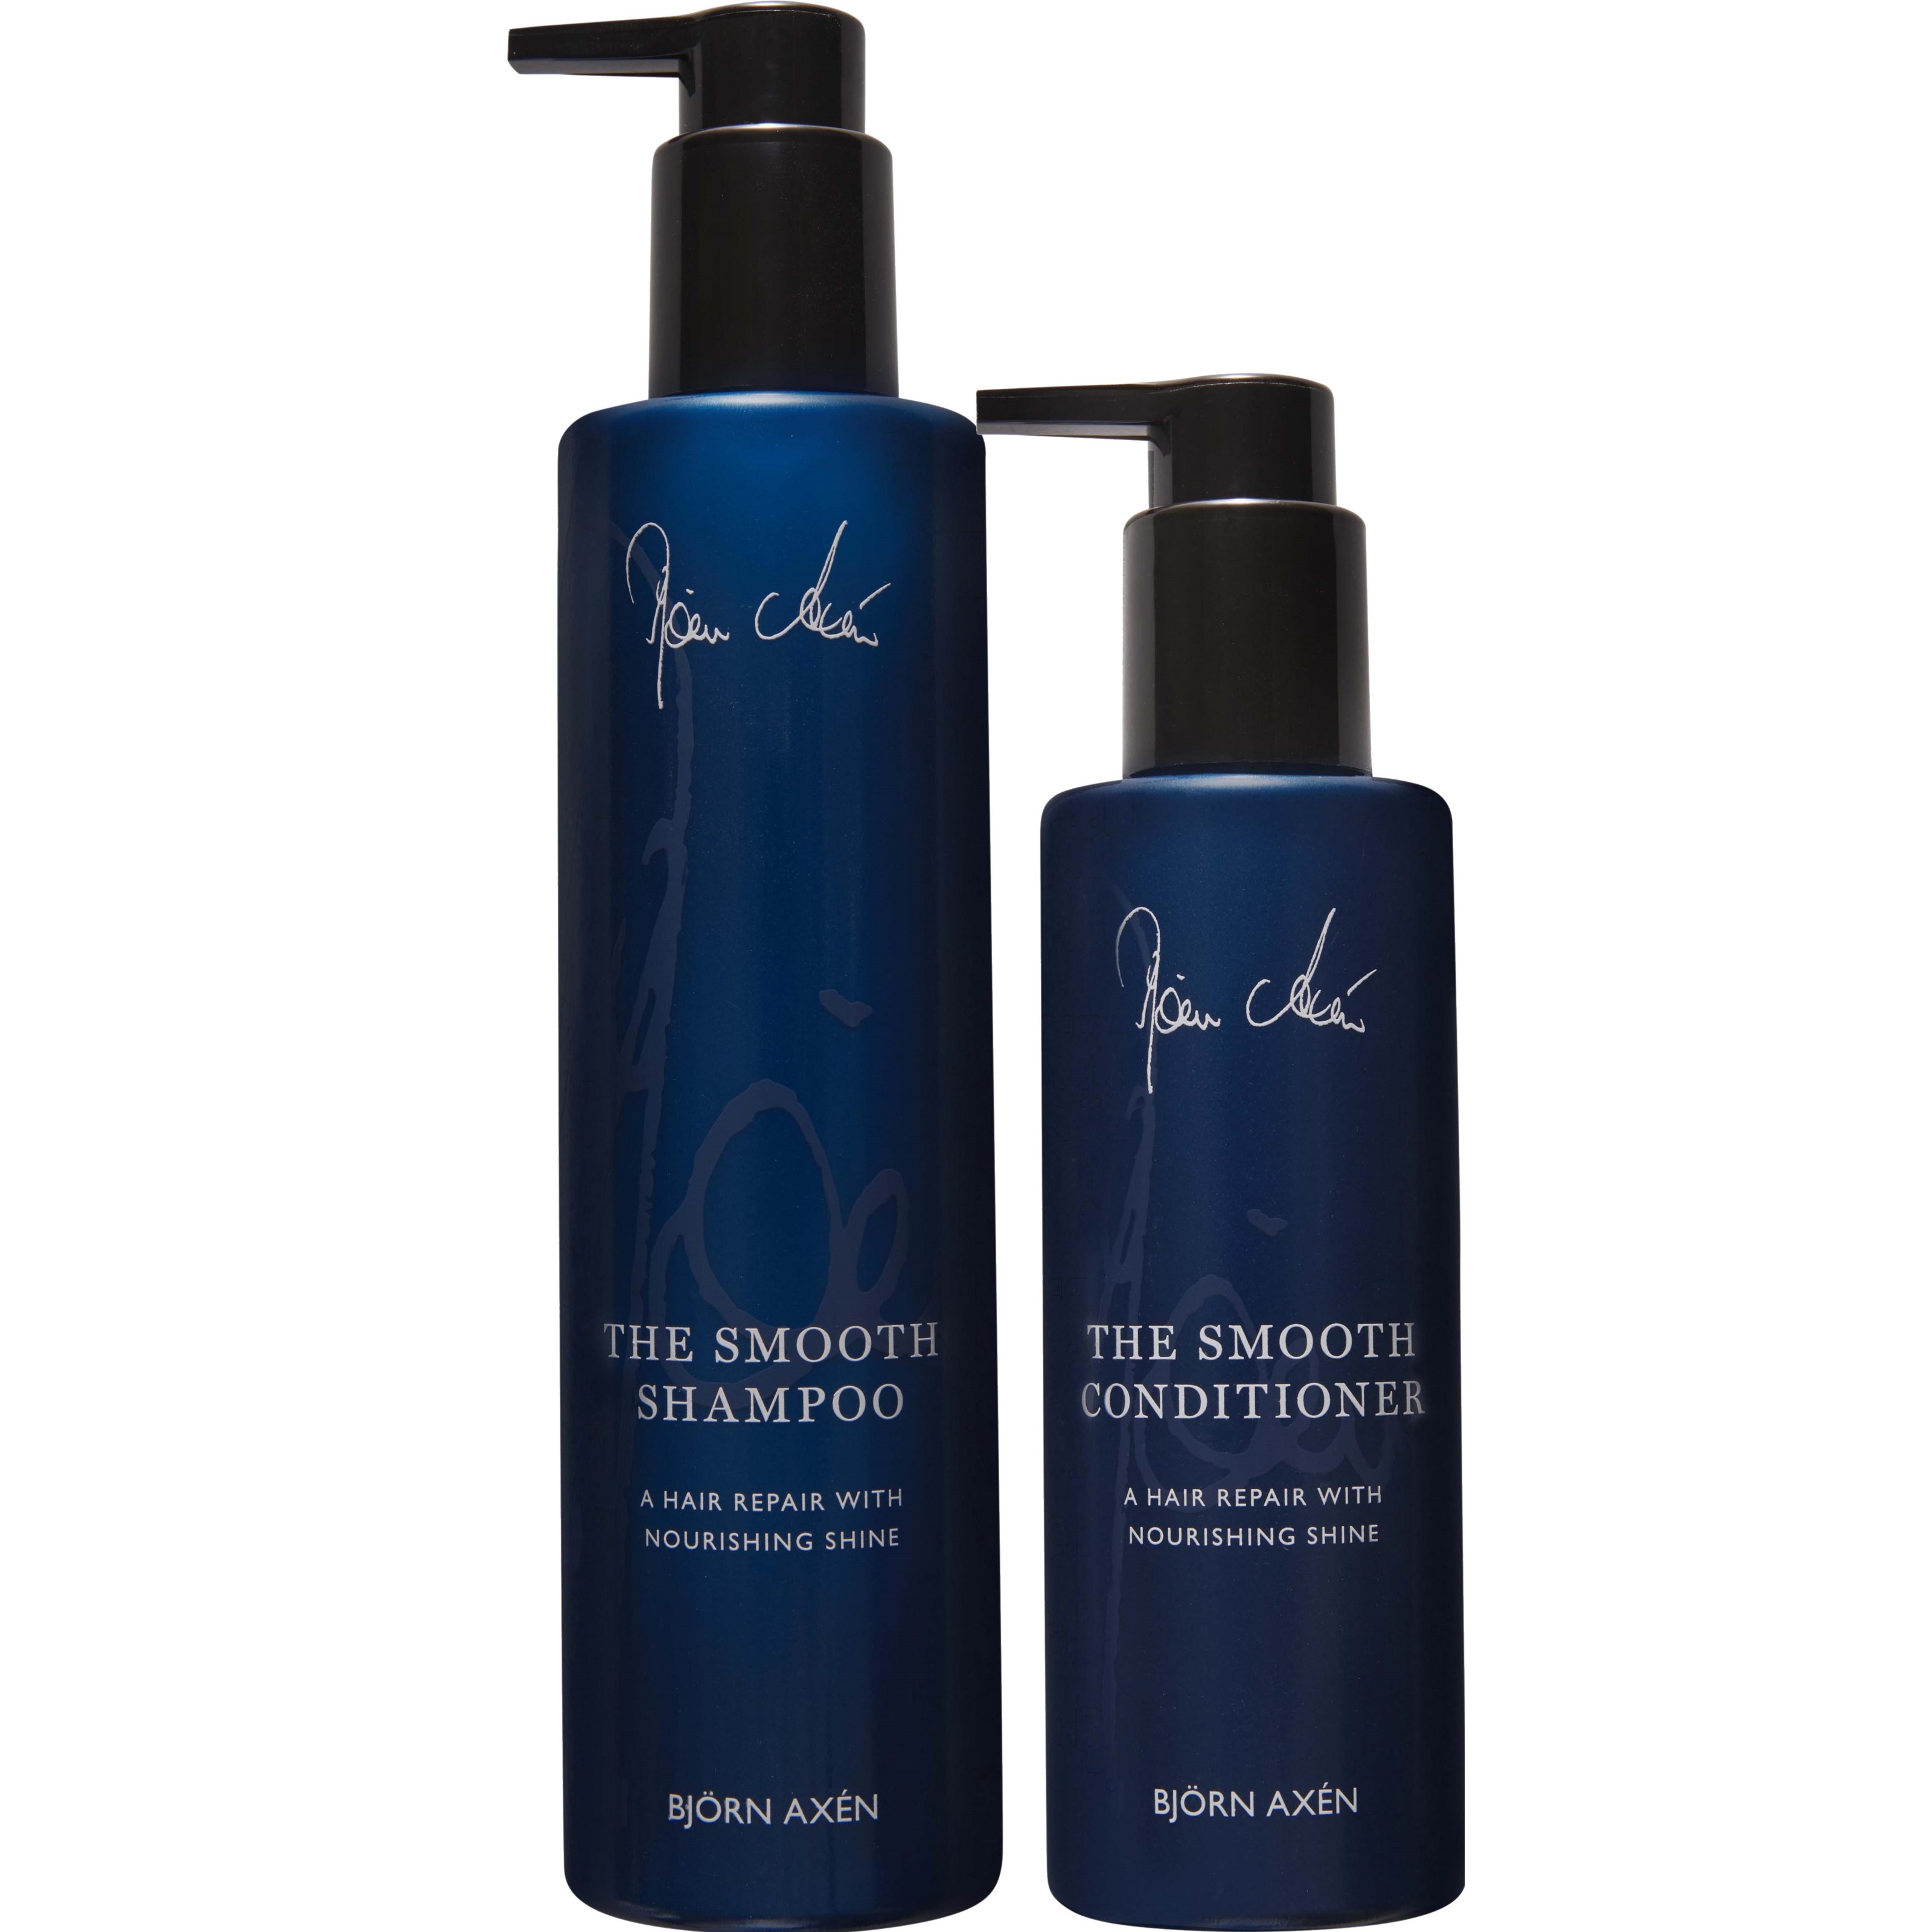 Björn Axén Signature The Smooth Duo